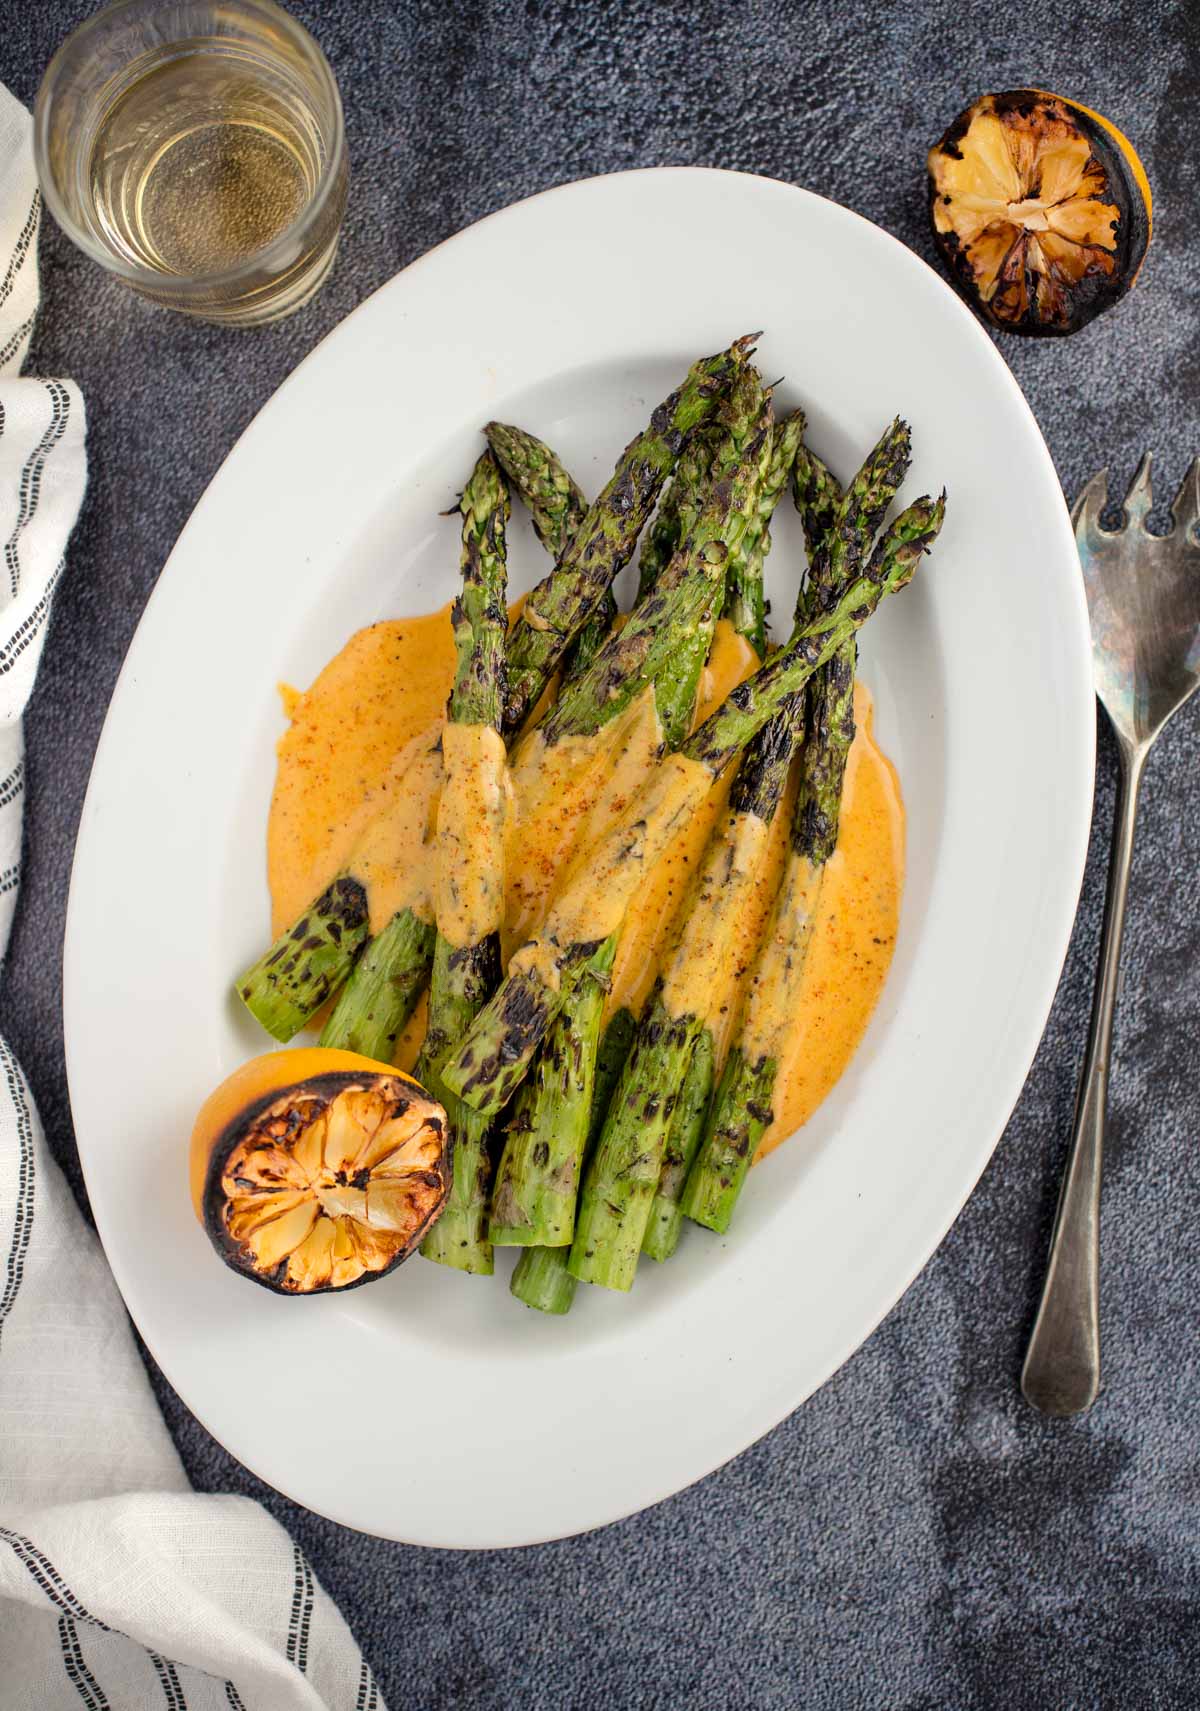 Grilled Asparagus with a BBQ flavored Hollandaise sauce on a white plate